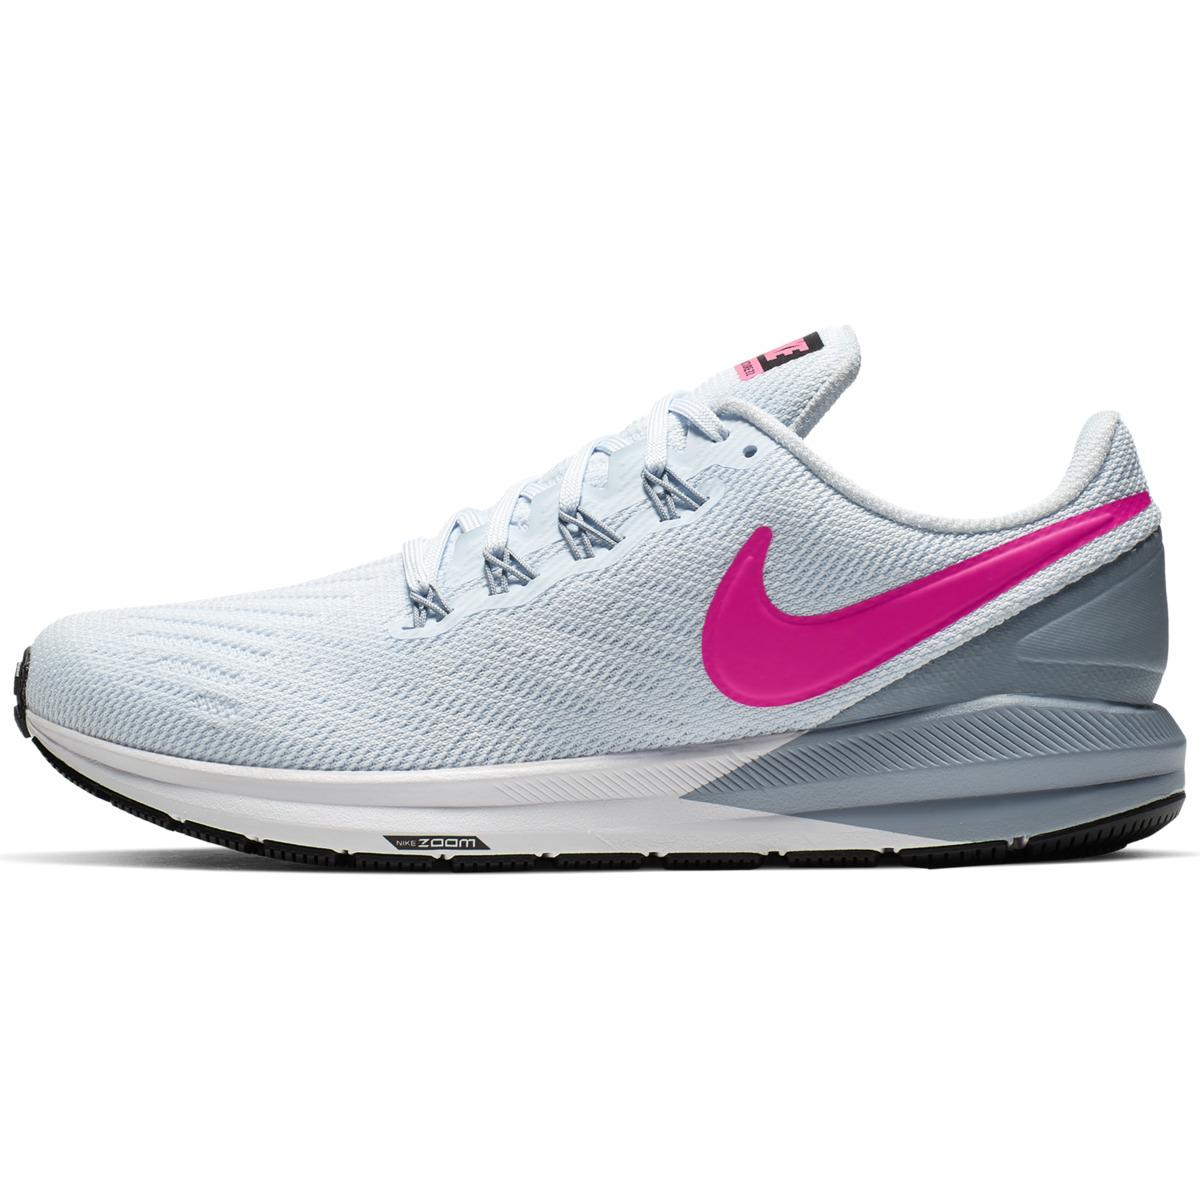 Nike Air Zoom Structure 22 Running Shoes in White/Pink (White) - Lyst